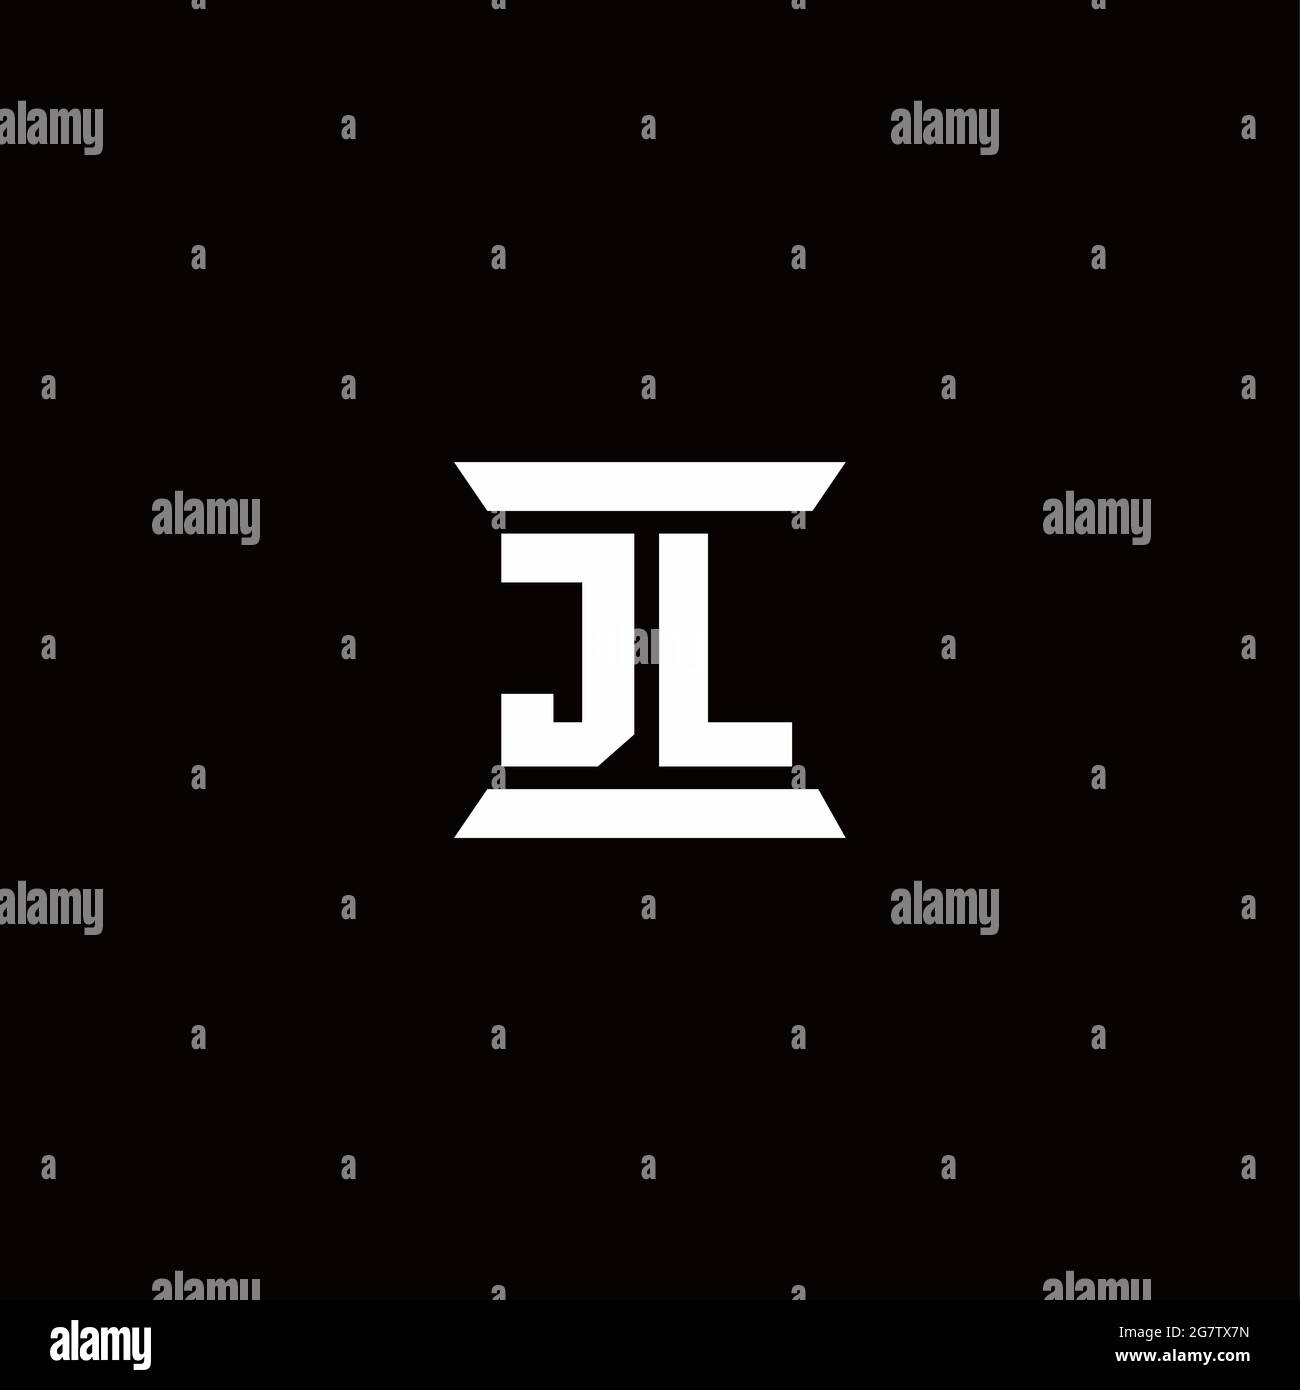 JL logo initial letter monogram with pillar shape design template isolated in black background Stock Vector